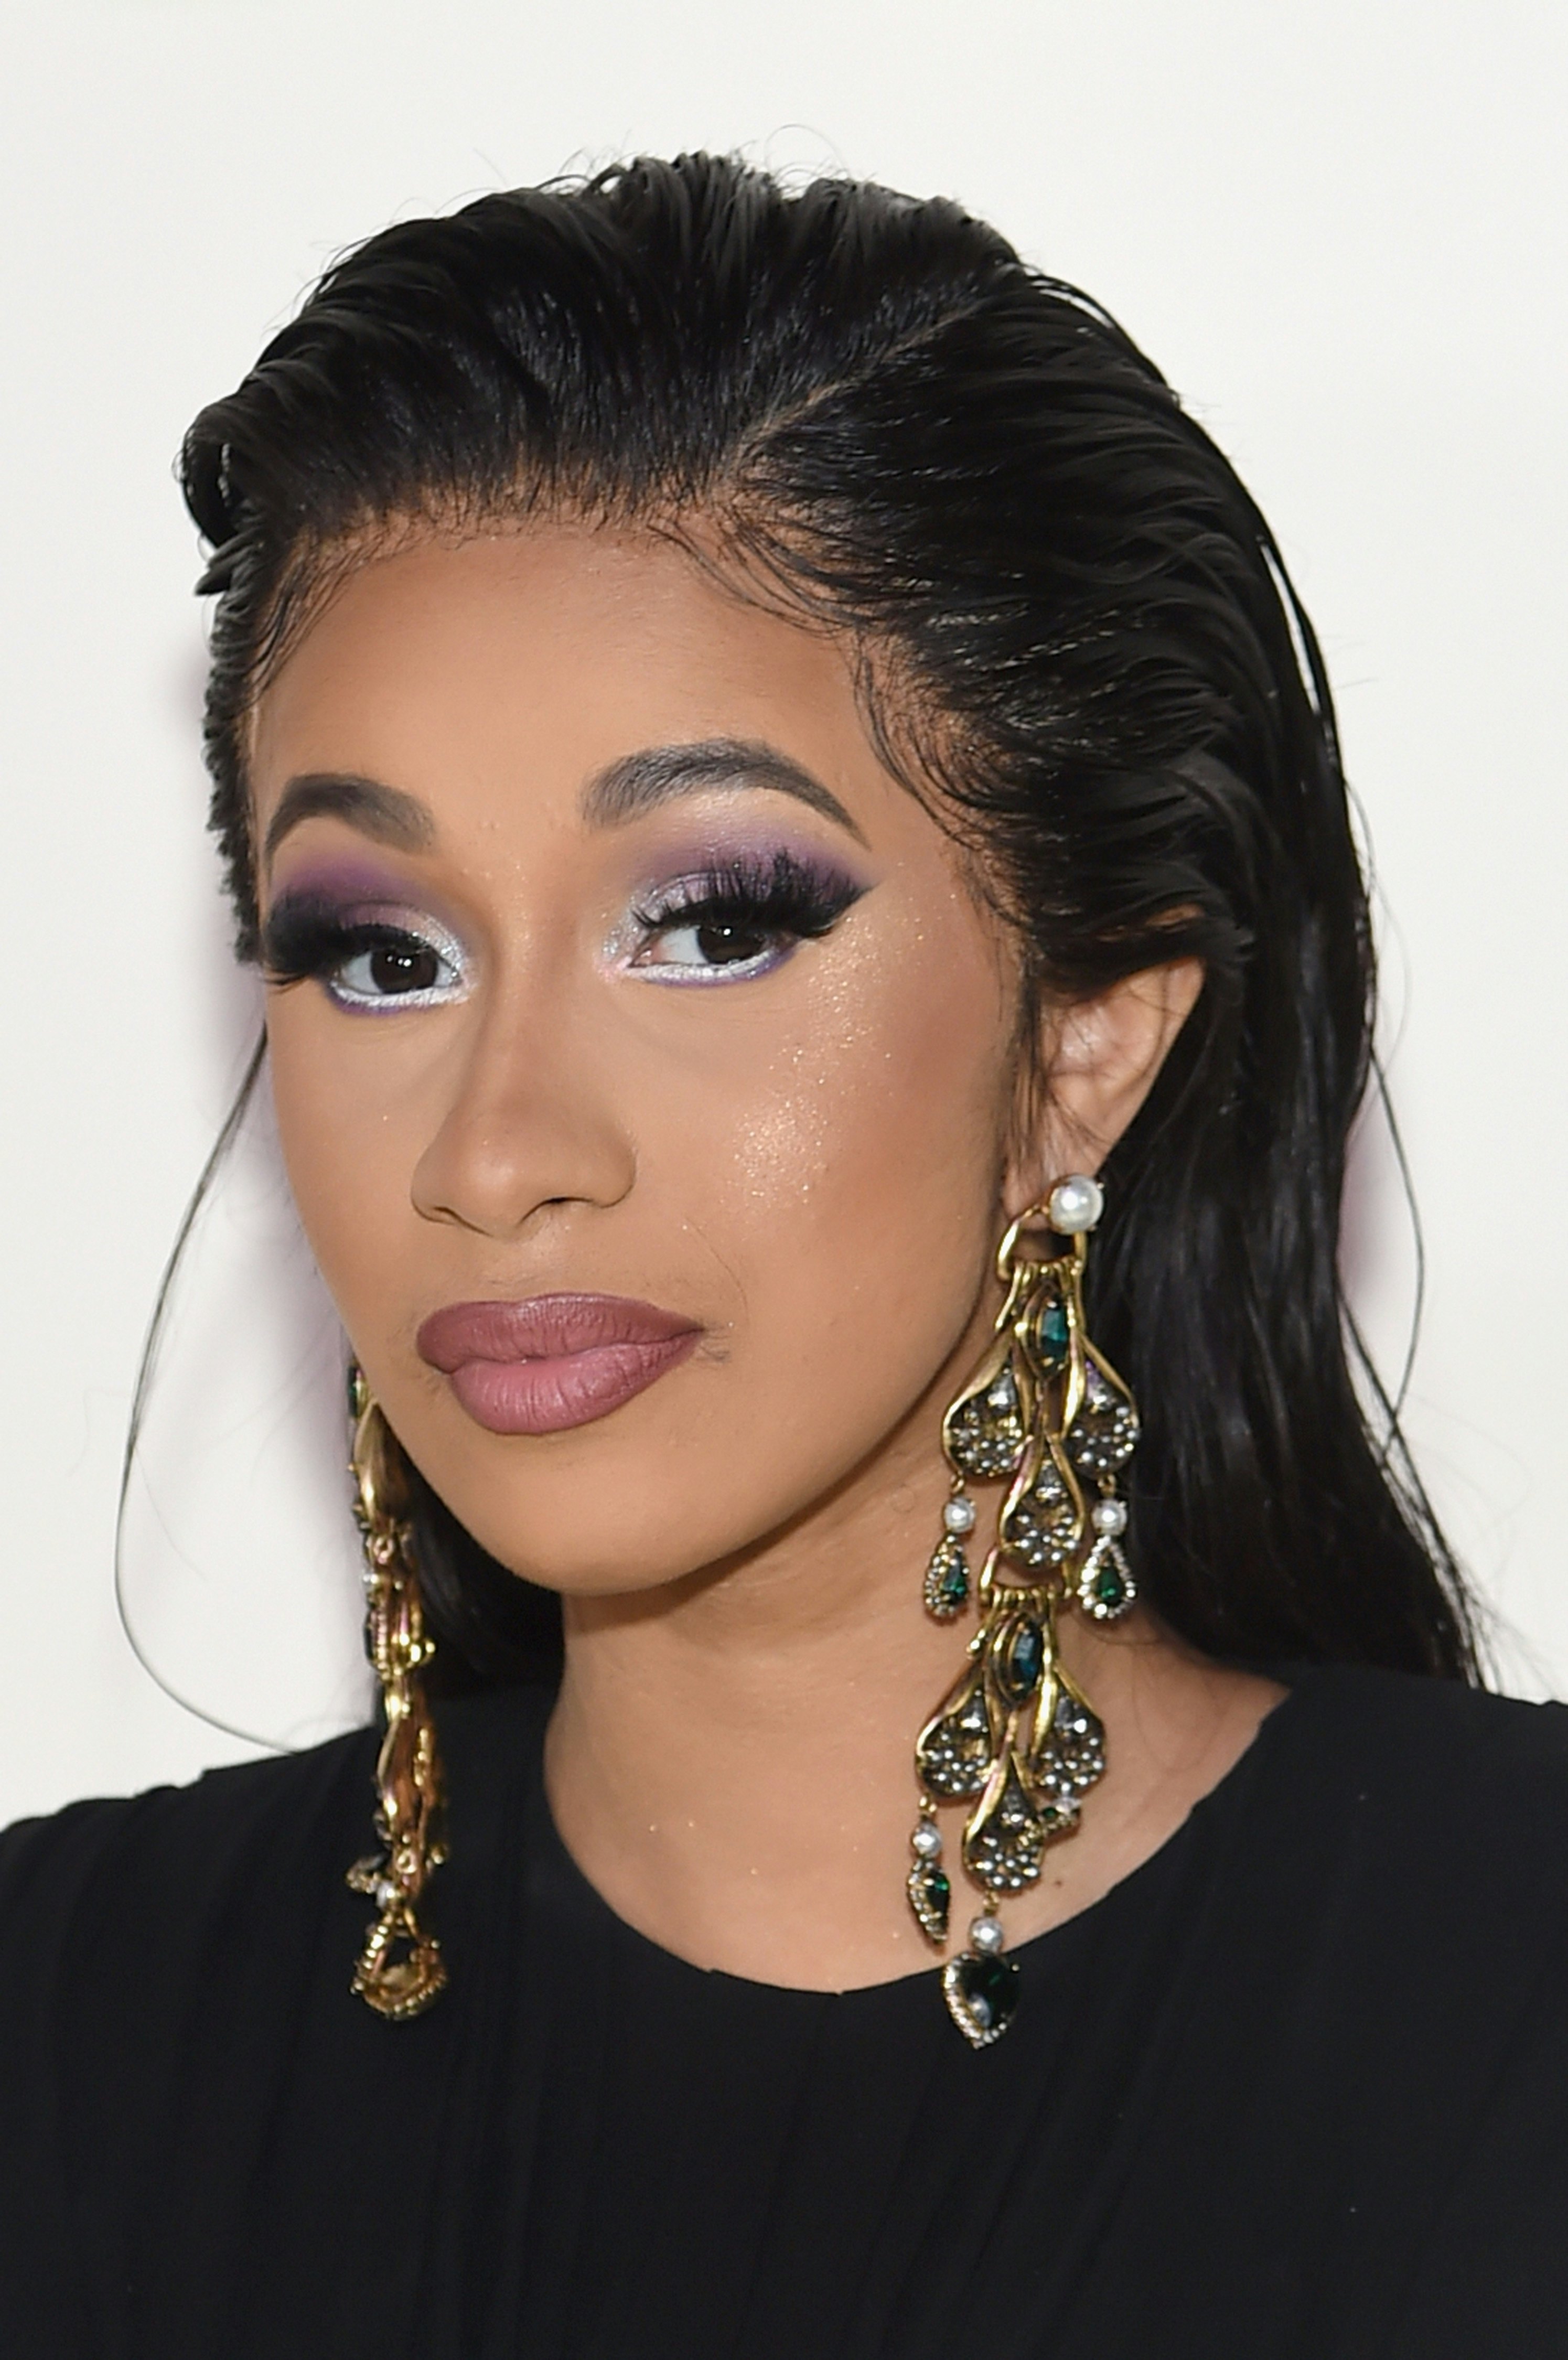 Cardi B Debuted A Hair Look Full Of Pearls Courtesy Of Tokyo Stylez